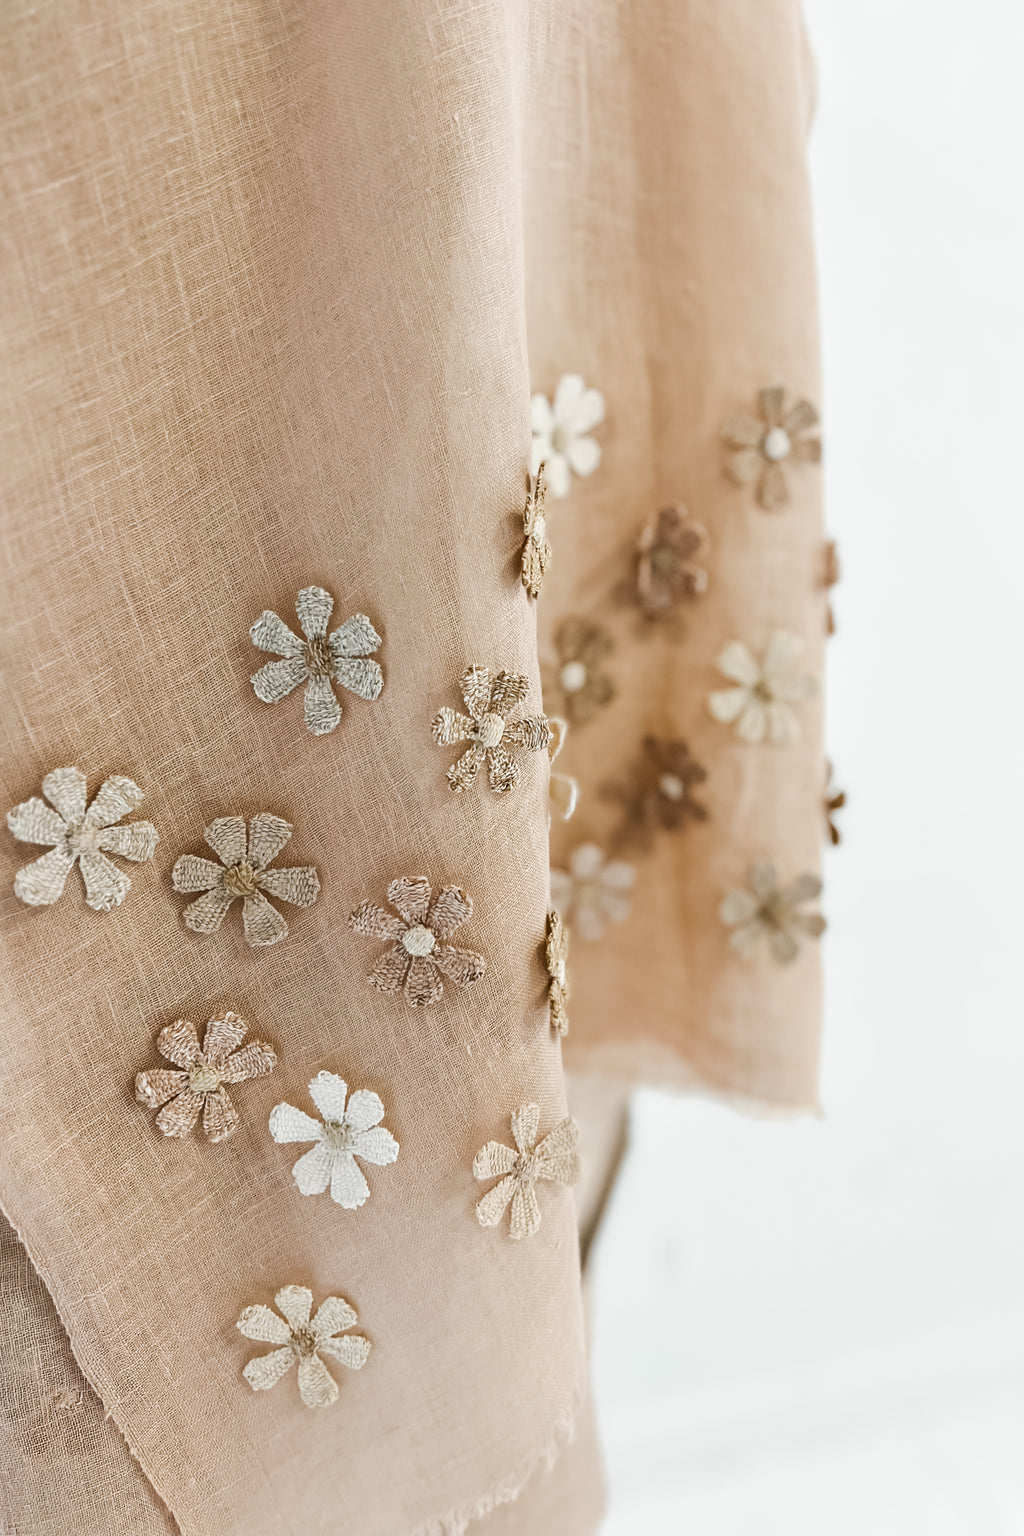 Sophie Digard | Embroidered Linen Stole | Daisy